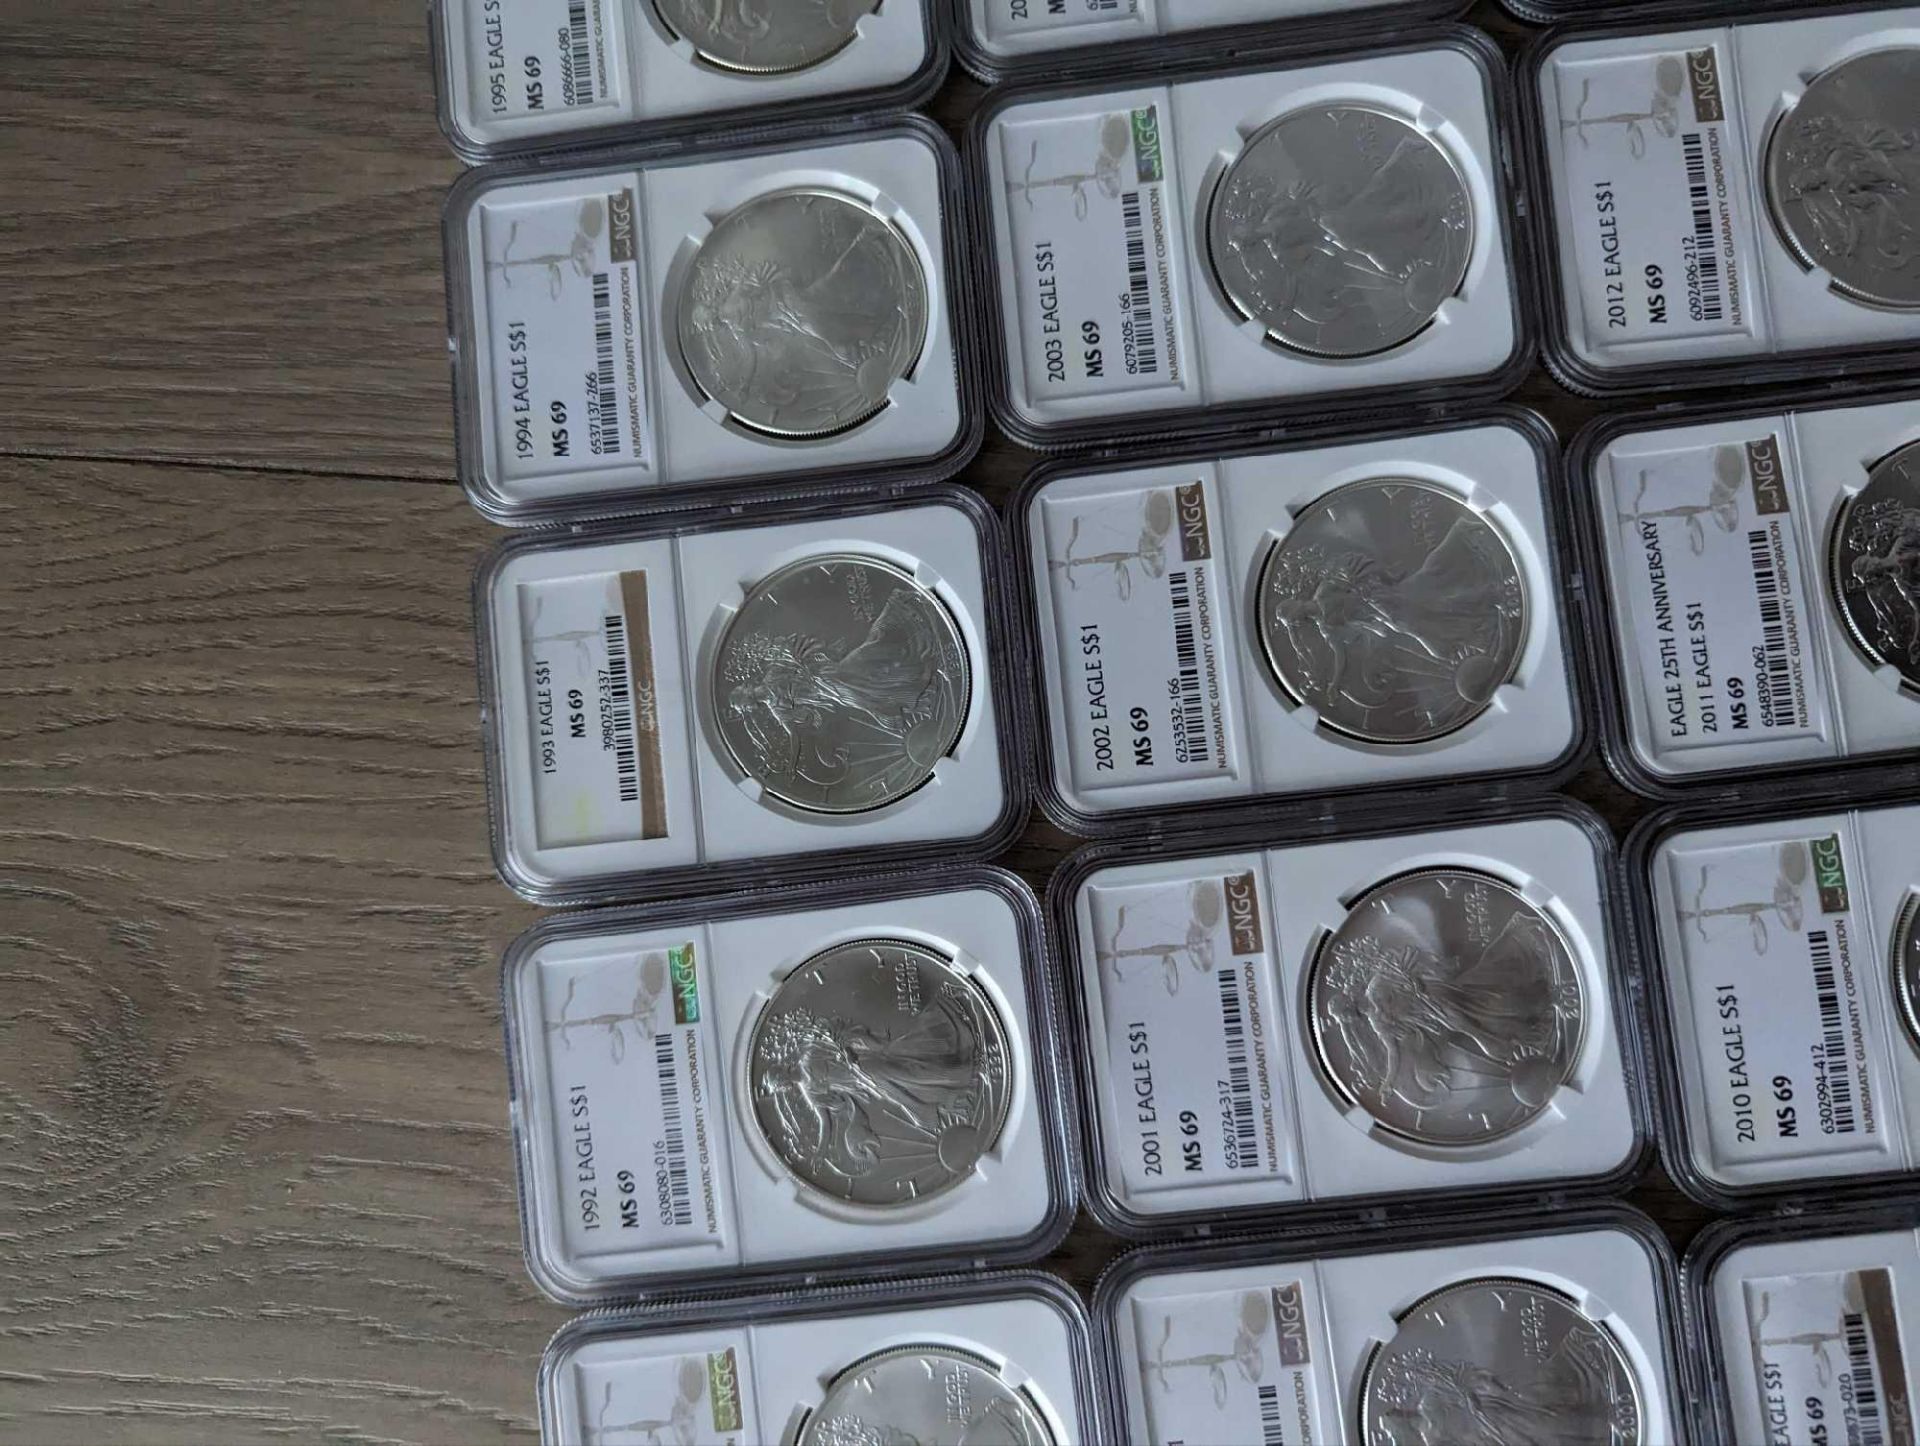 1986 to 2022. complete silver eagle PCGS set in boxes (37 eagles in sequential order) - Image 5 of 22